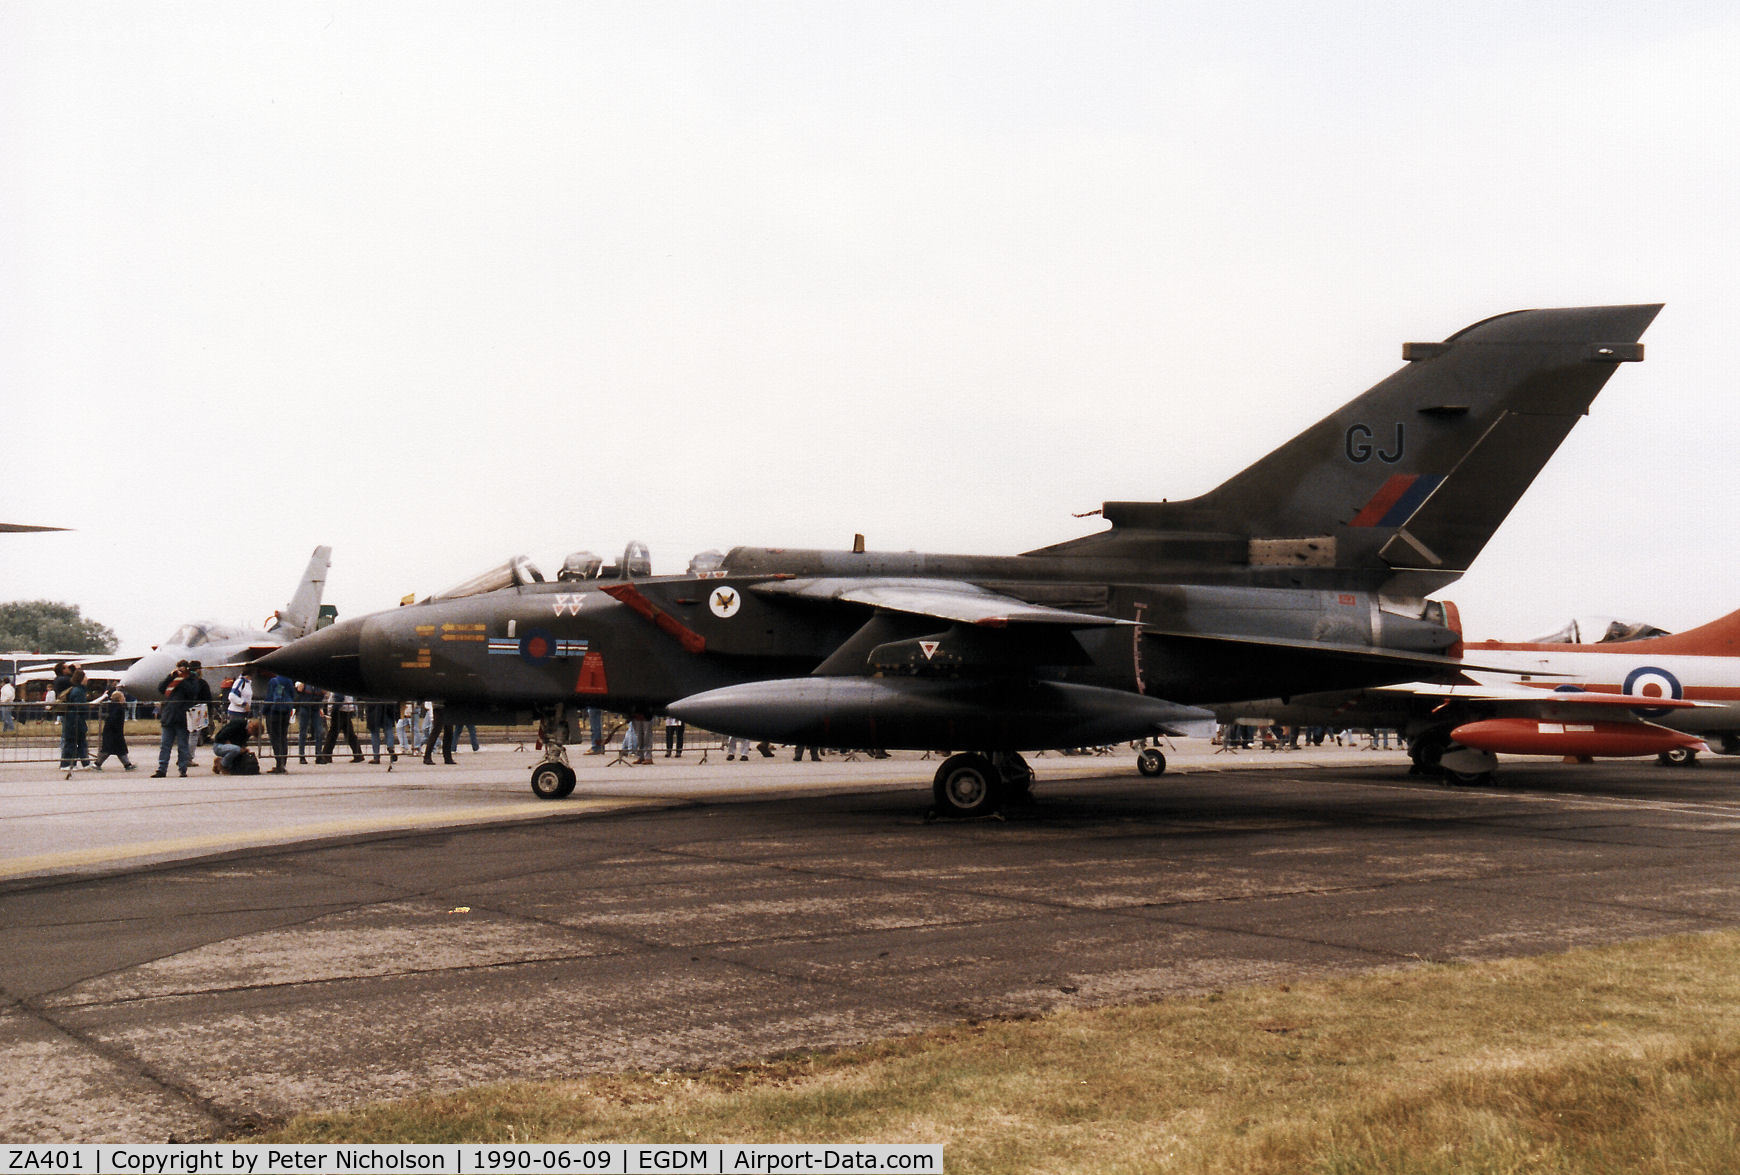 ZA401, 1982 Panavia Tornado GR.1A C/N 206/BS068/2207, Tornado GR.1A of 20 Squadron on loan to the A&AEE on display at the 1990 Boscombe Down Battle of Britain 50th Anniversary Airshow.